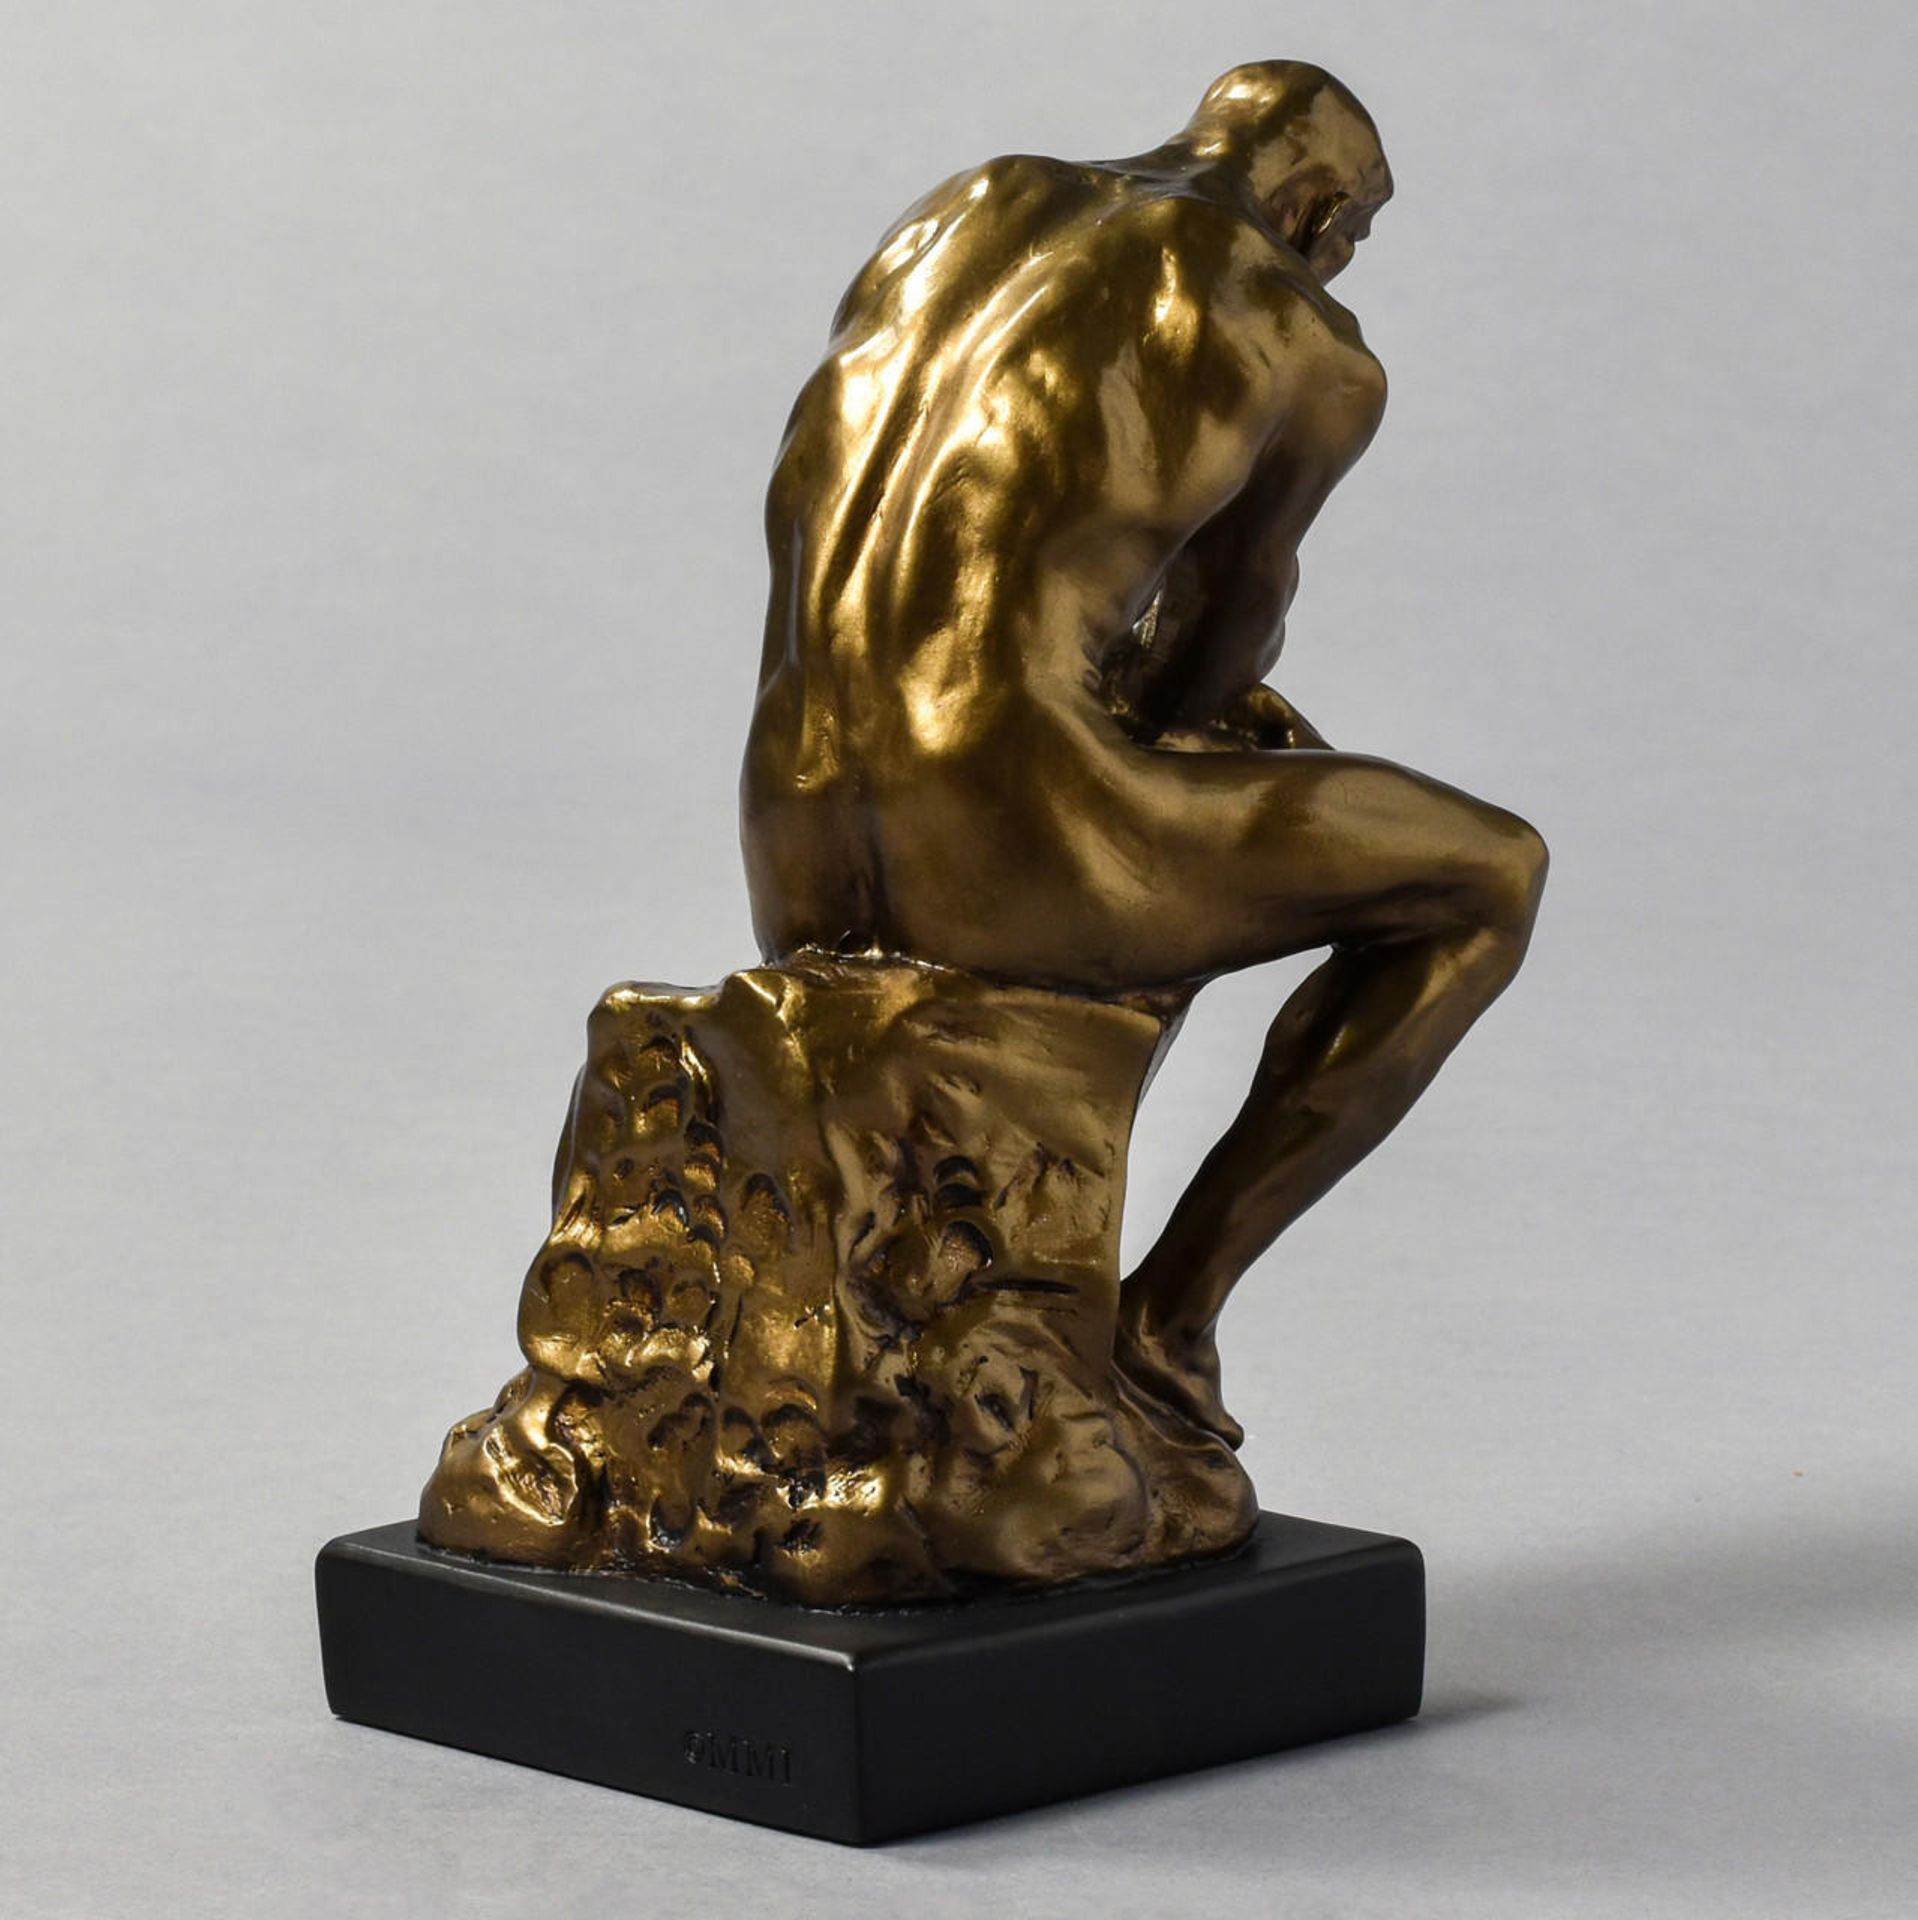 Auguste Rodin "The Thinker" Sculpture - Image 4 of 4